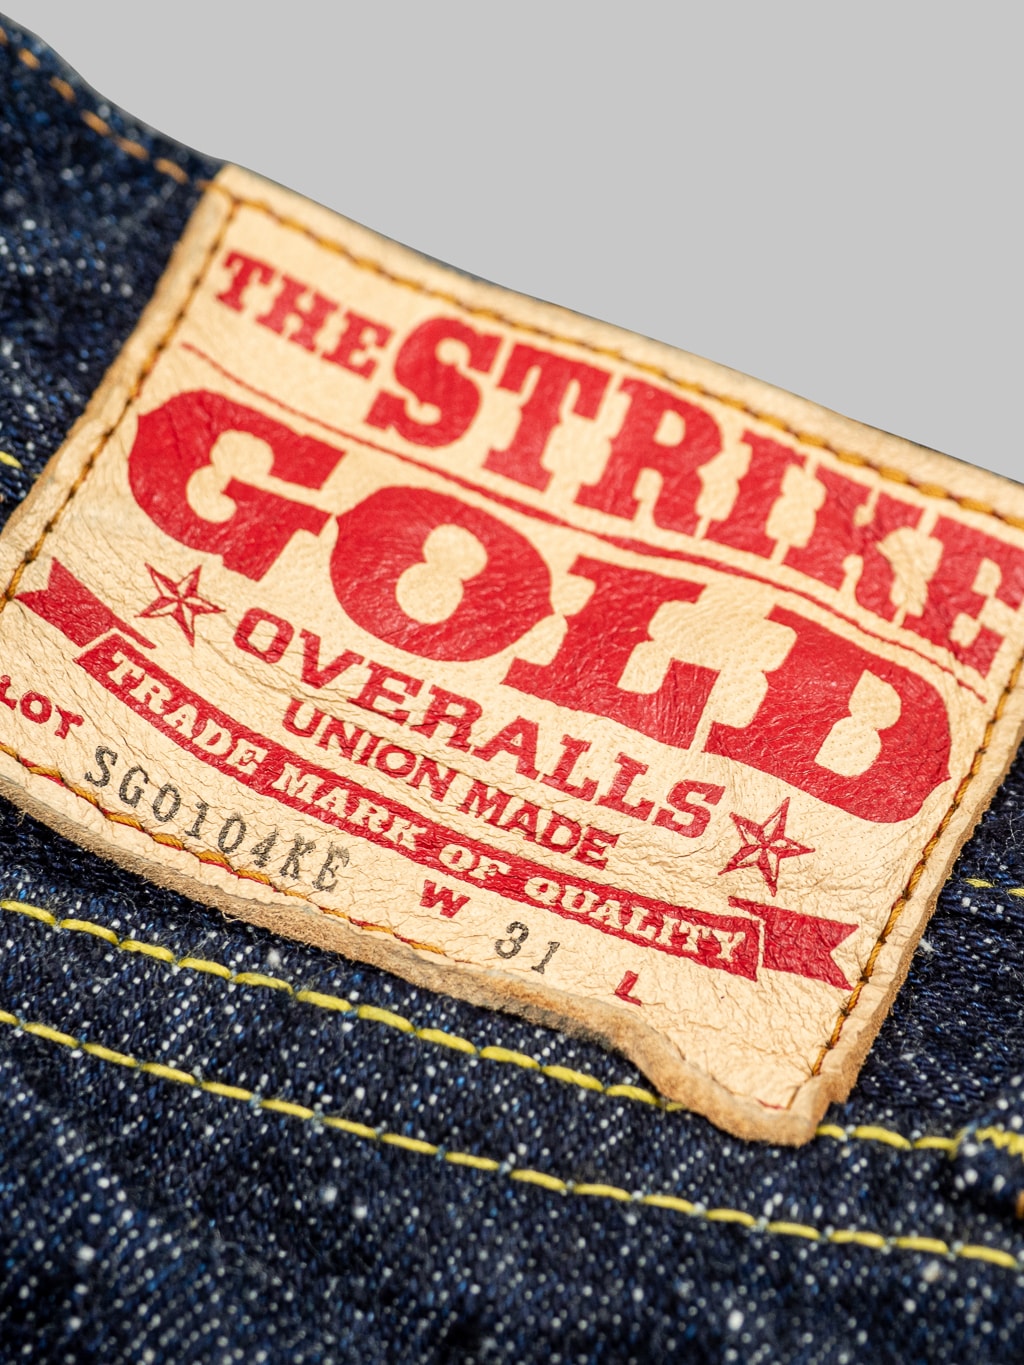 The Strike Gold Keep Earth Natural Indigo Jeans brand leather patch